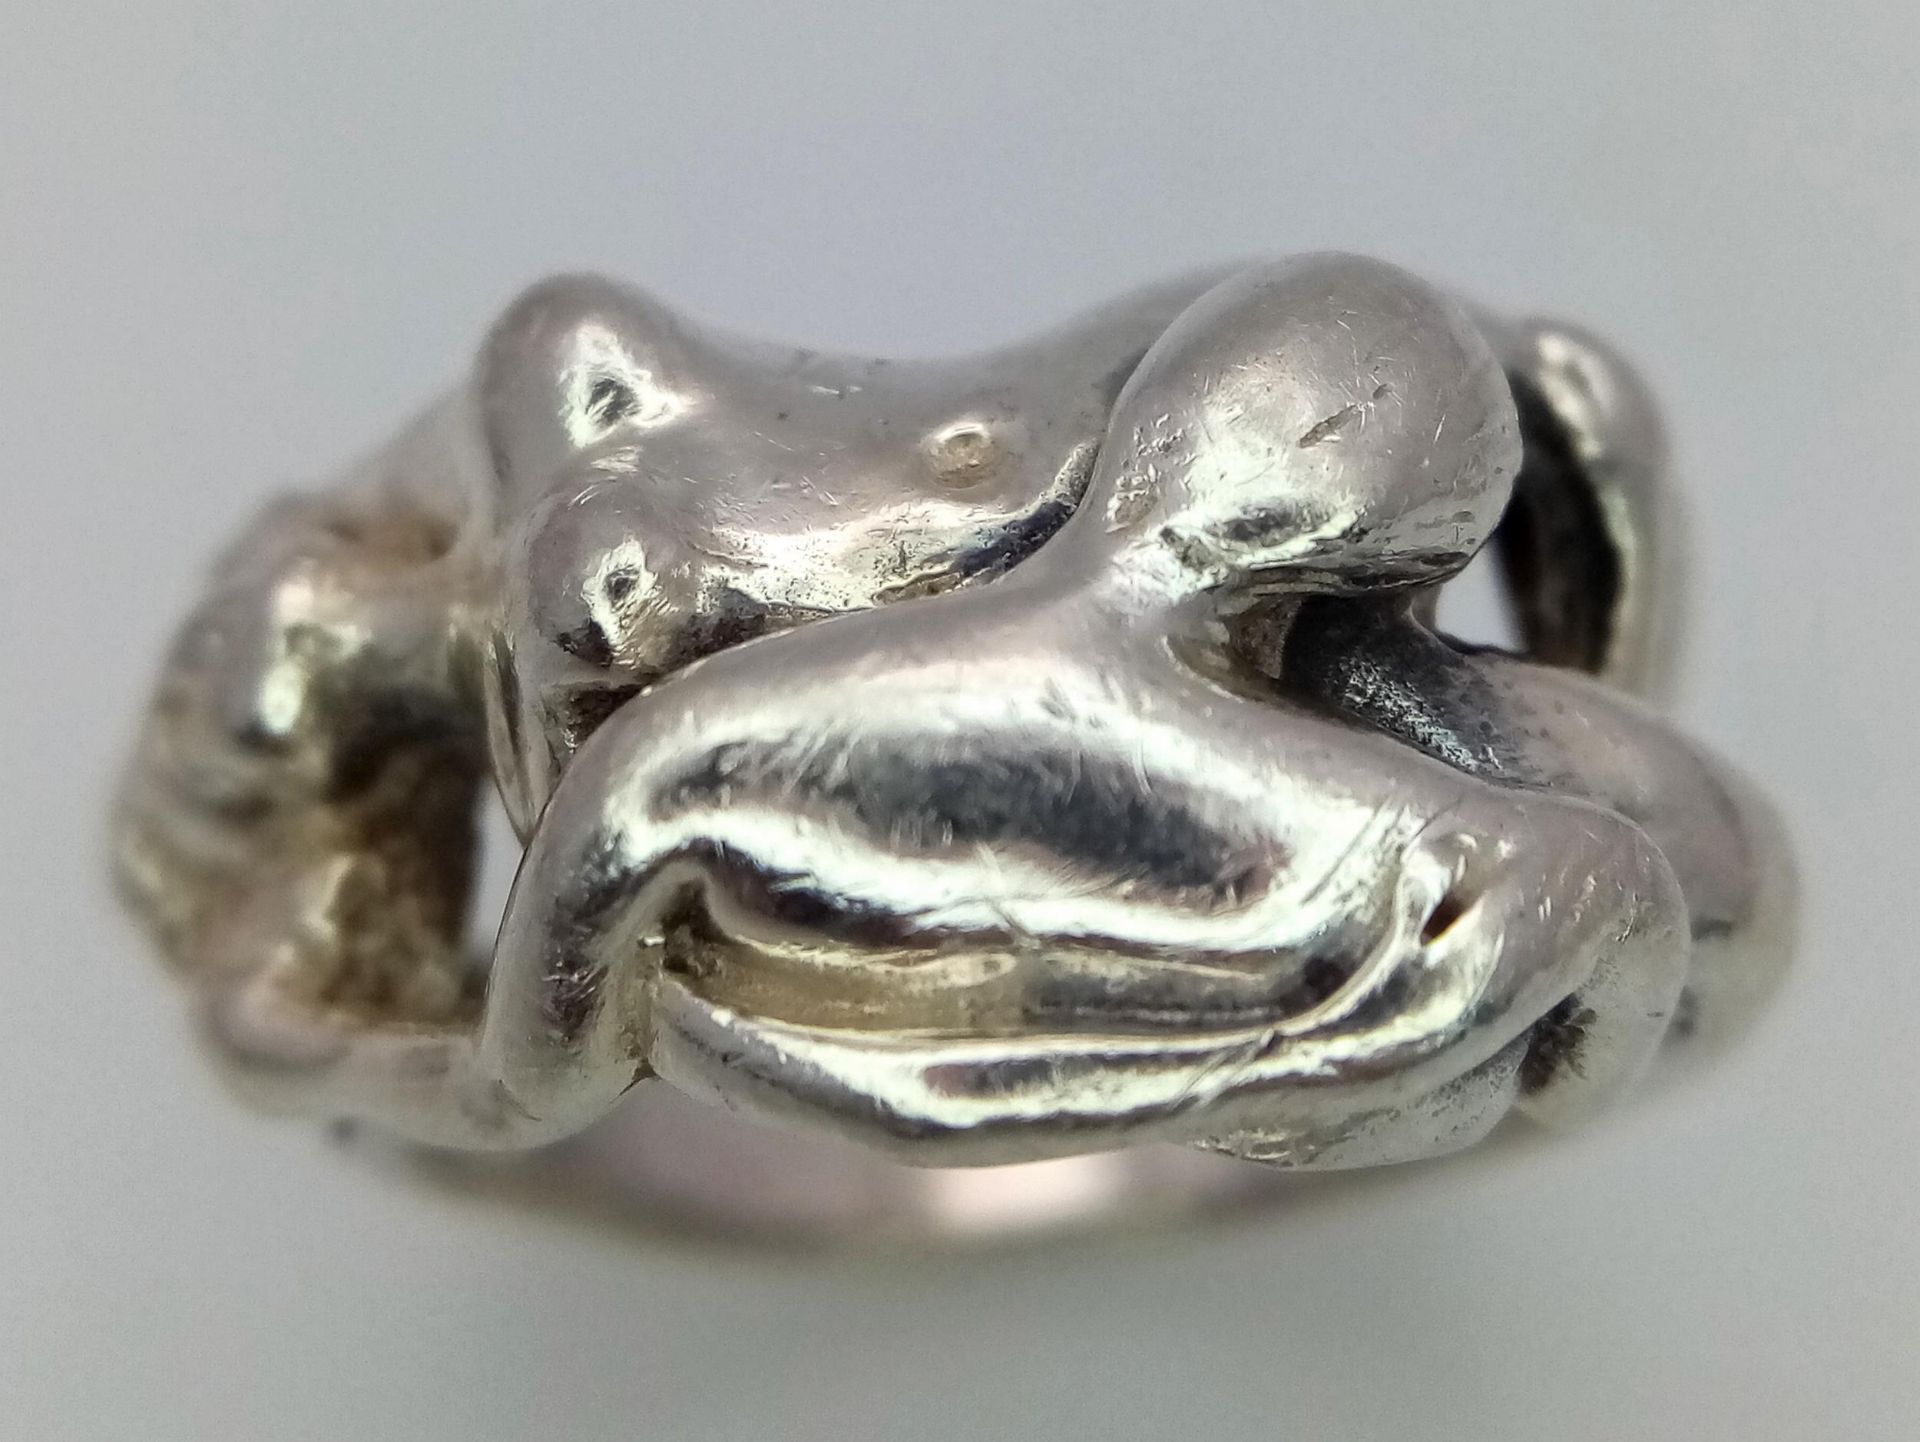 A Vintage and Rare Sterling Silver Erotic Design Ring Size N-N1/2. Measures 1.4cm Wide at the - Image 2 of 5